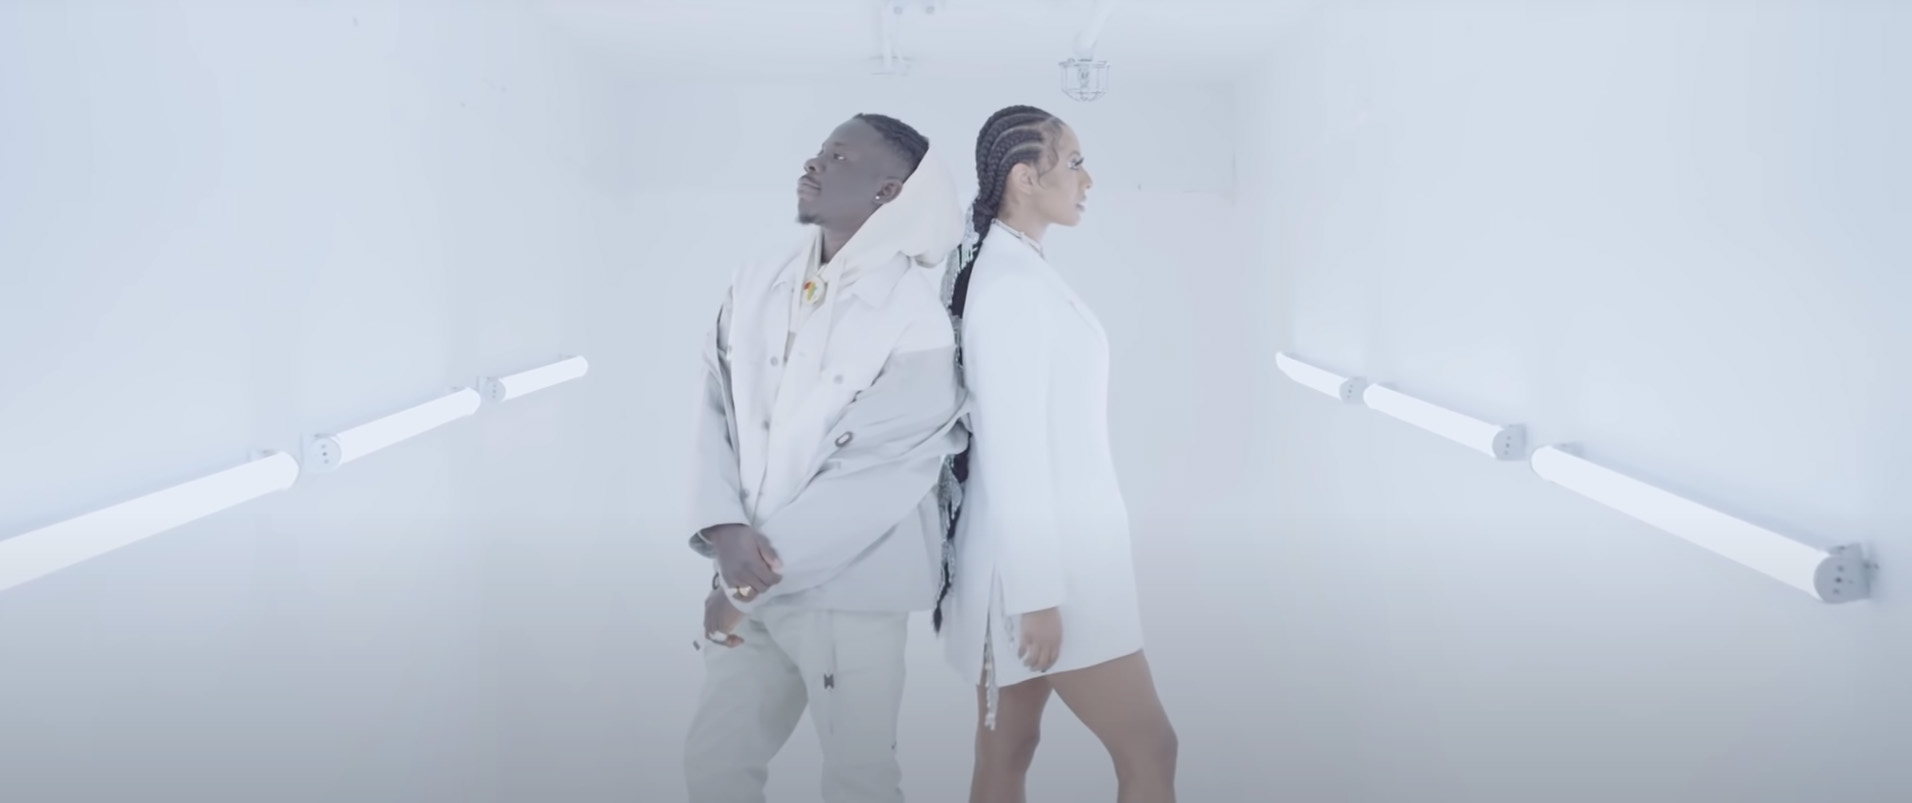 Nominate ft. Keri Hilson by Stonebwoy (Official Video)